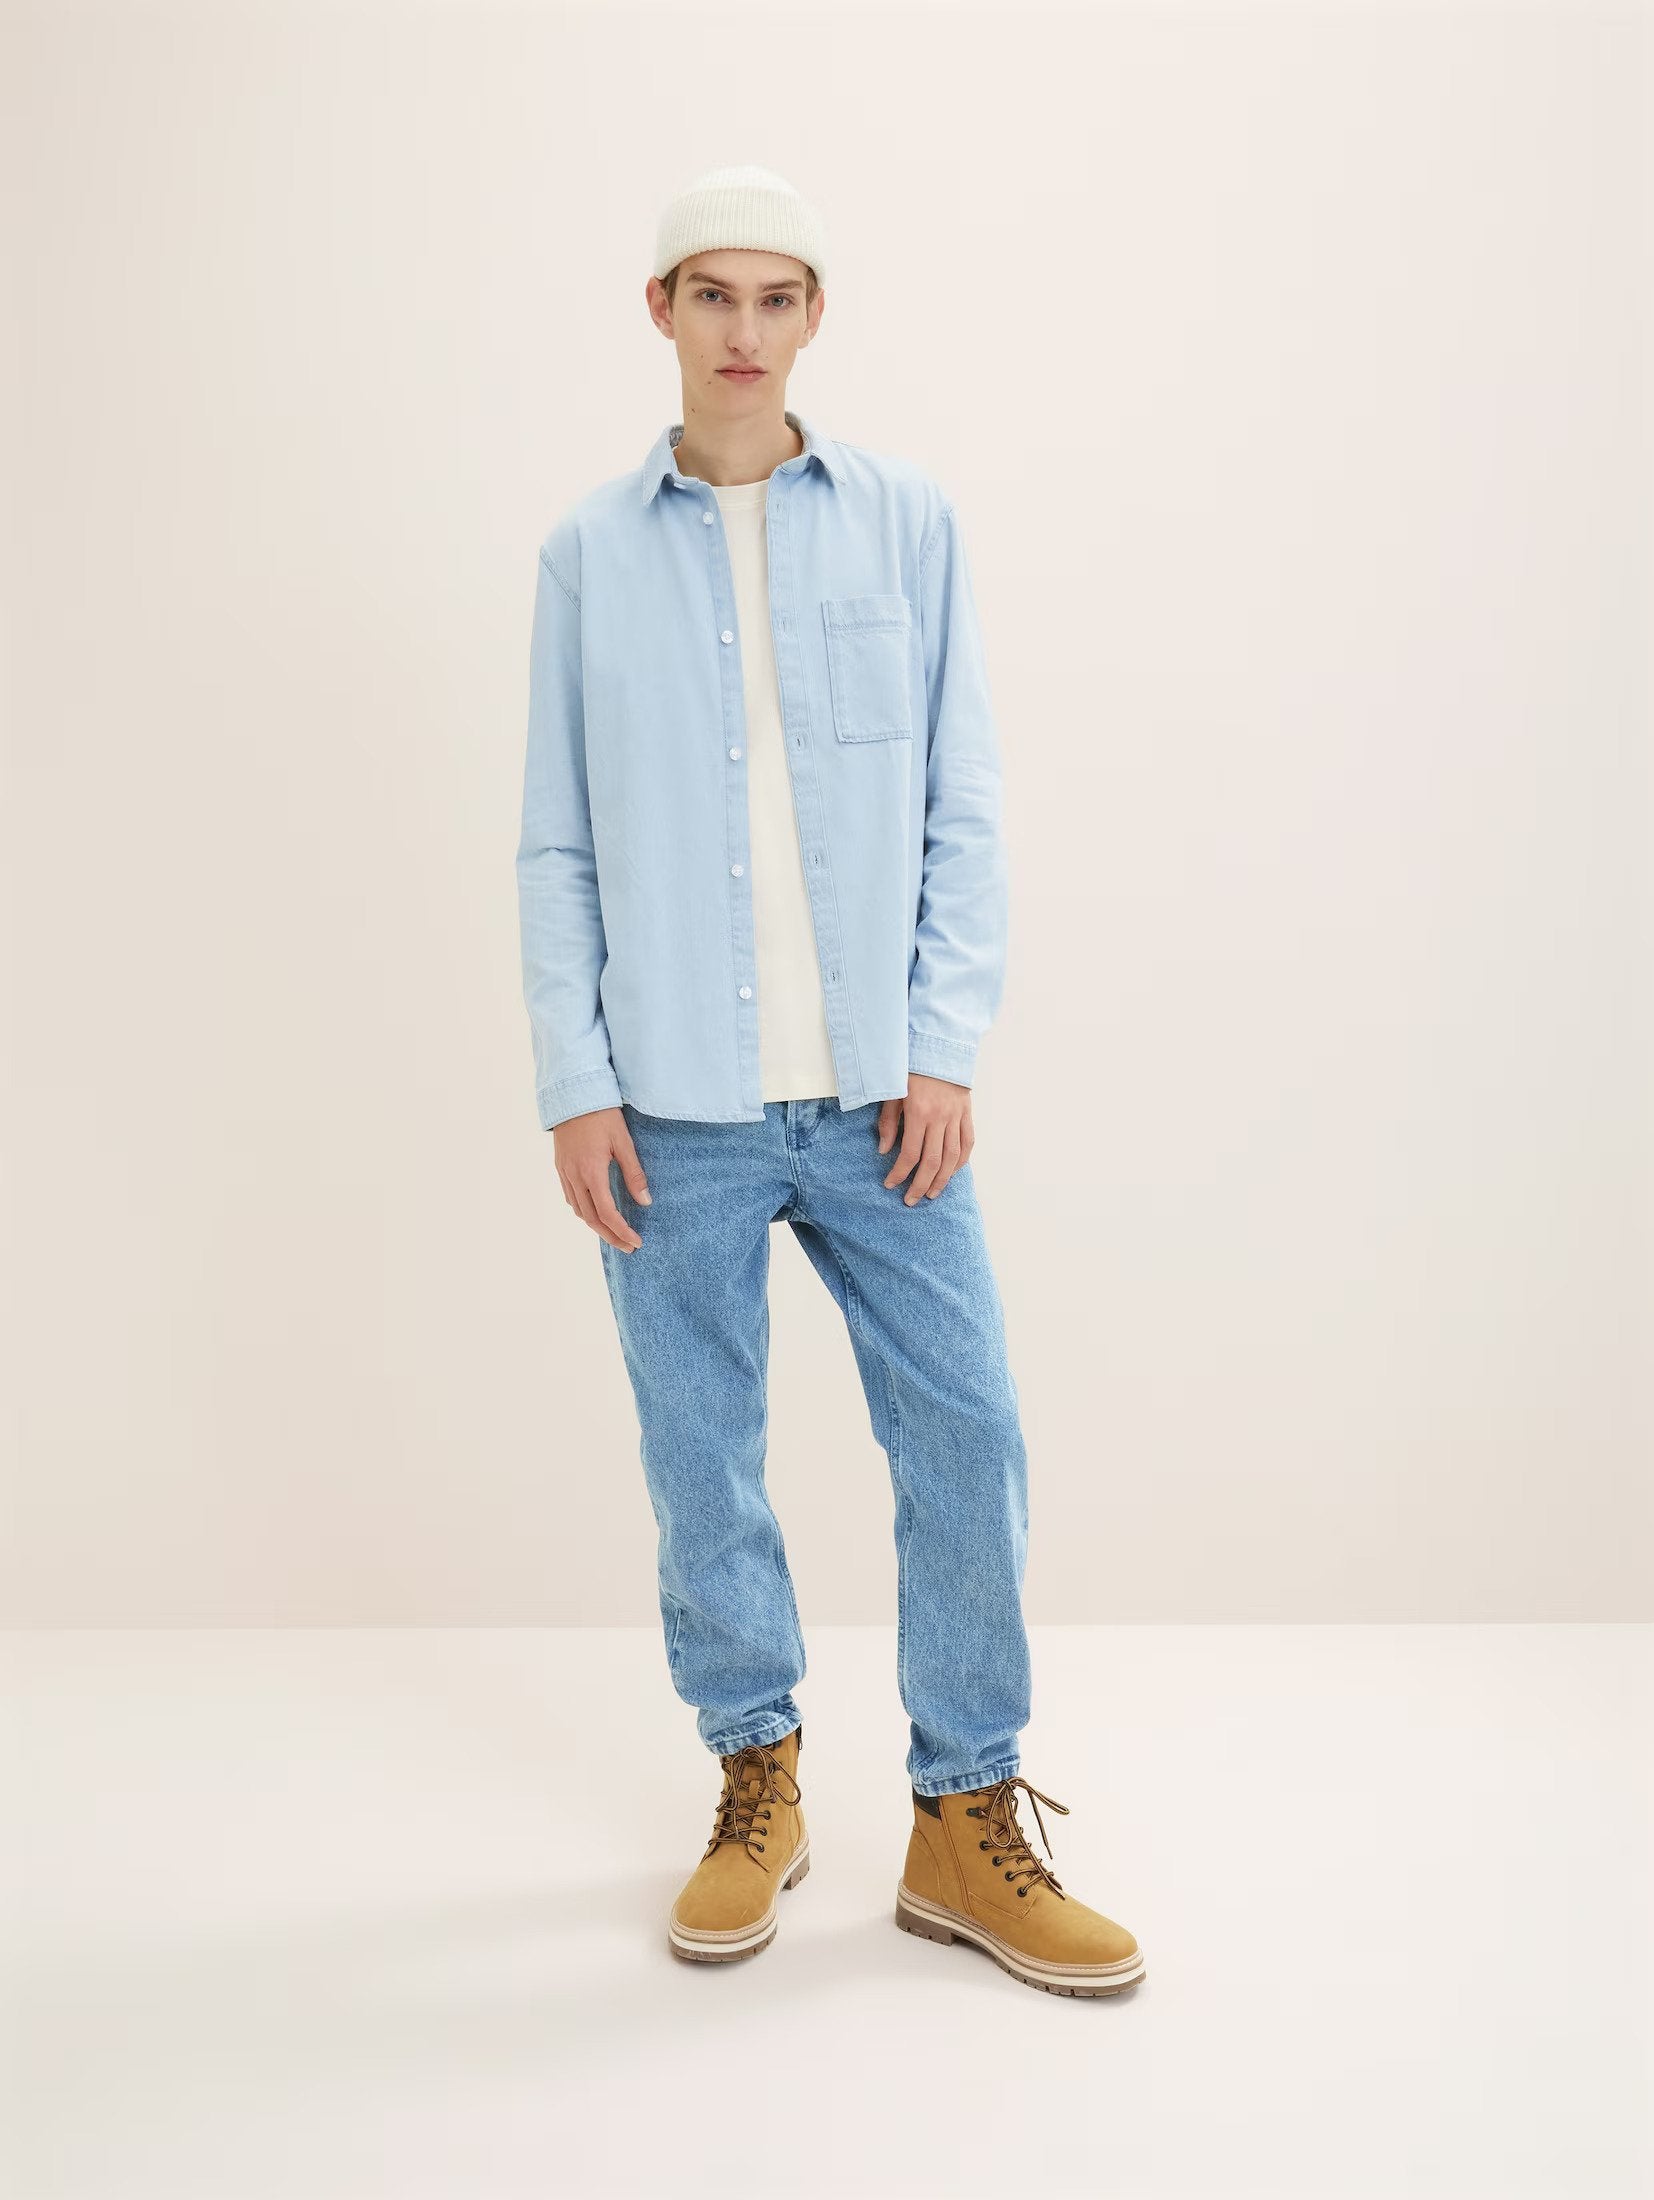 Tom Tailor Relaxed Denim Casual Blue Shirt